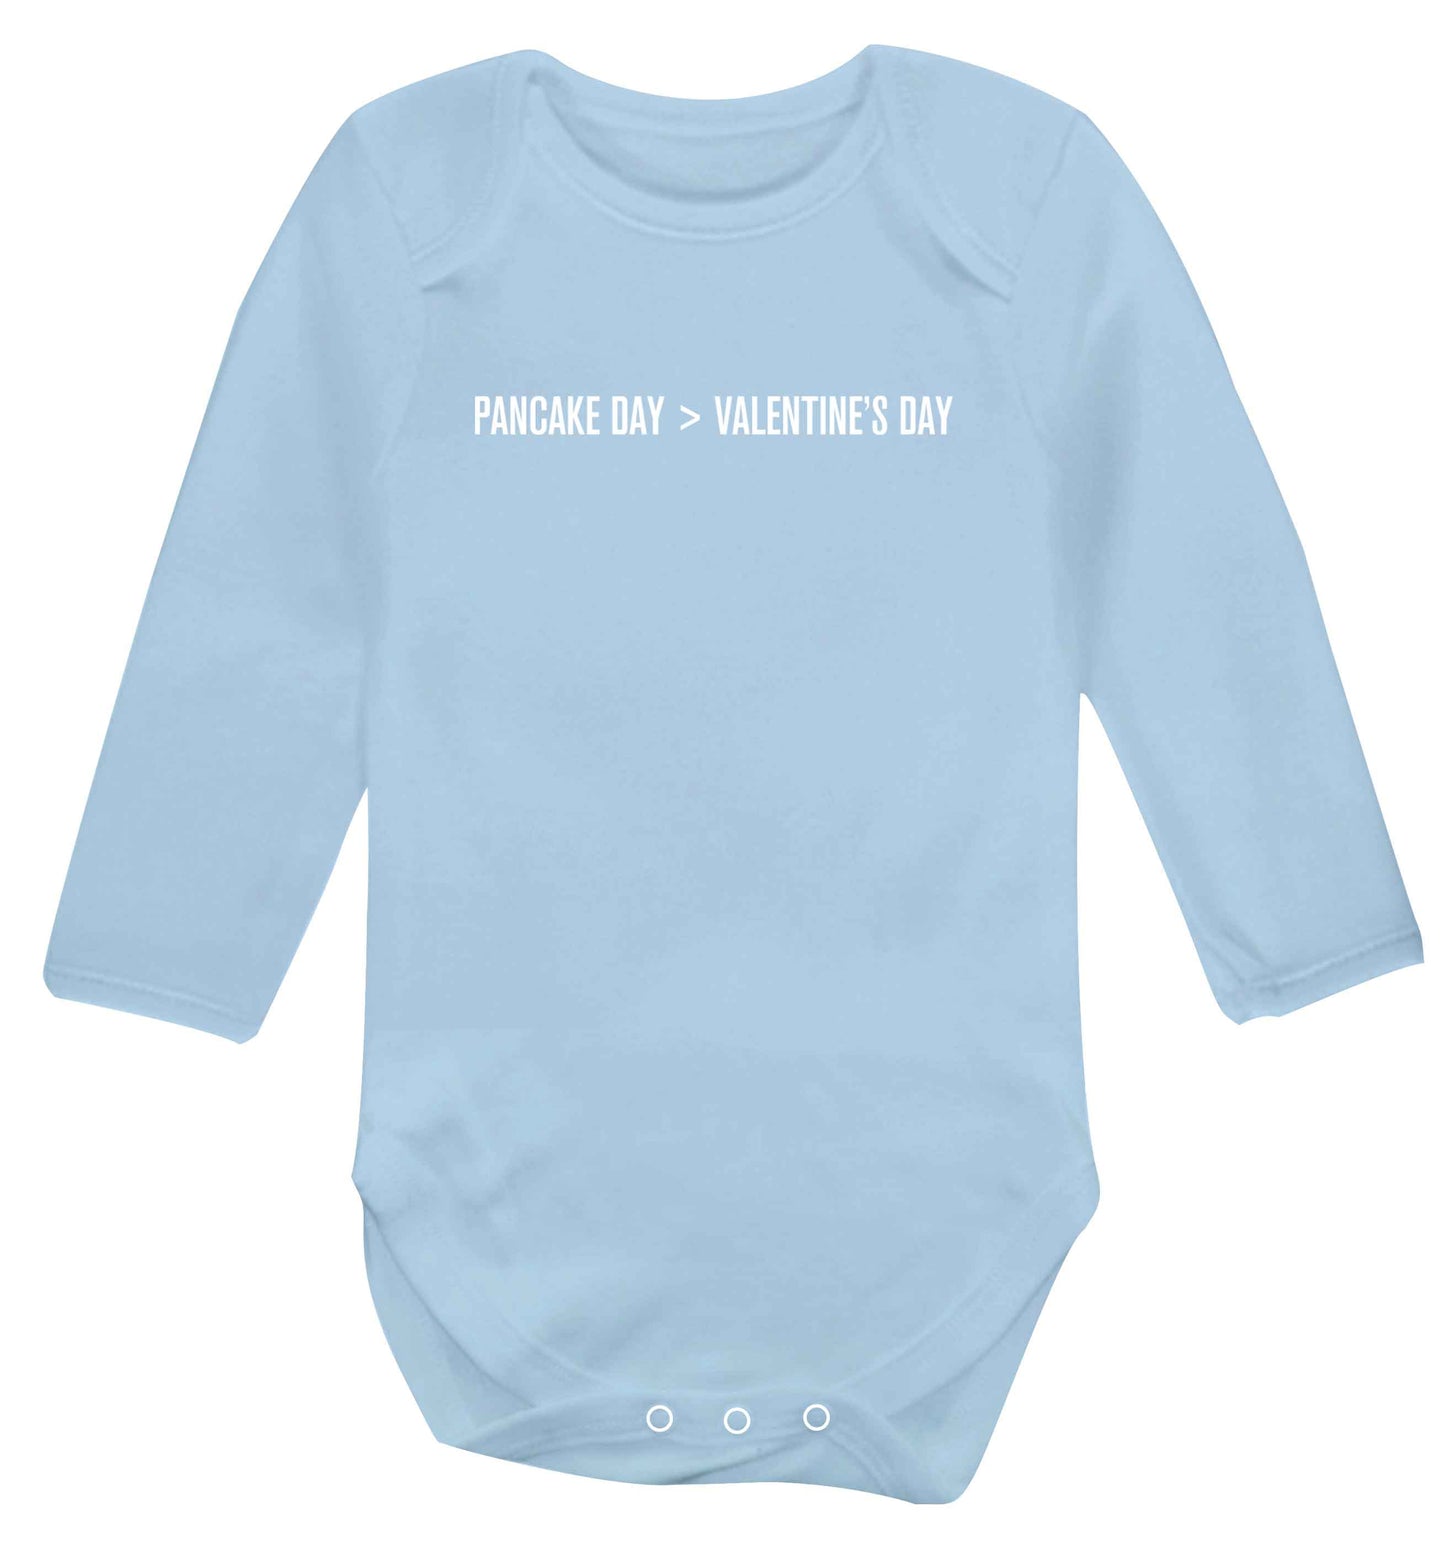 Pancake day > valentines day baby vest long sleeved pale blue 6-12 months